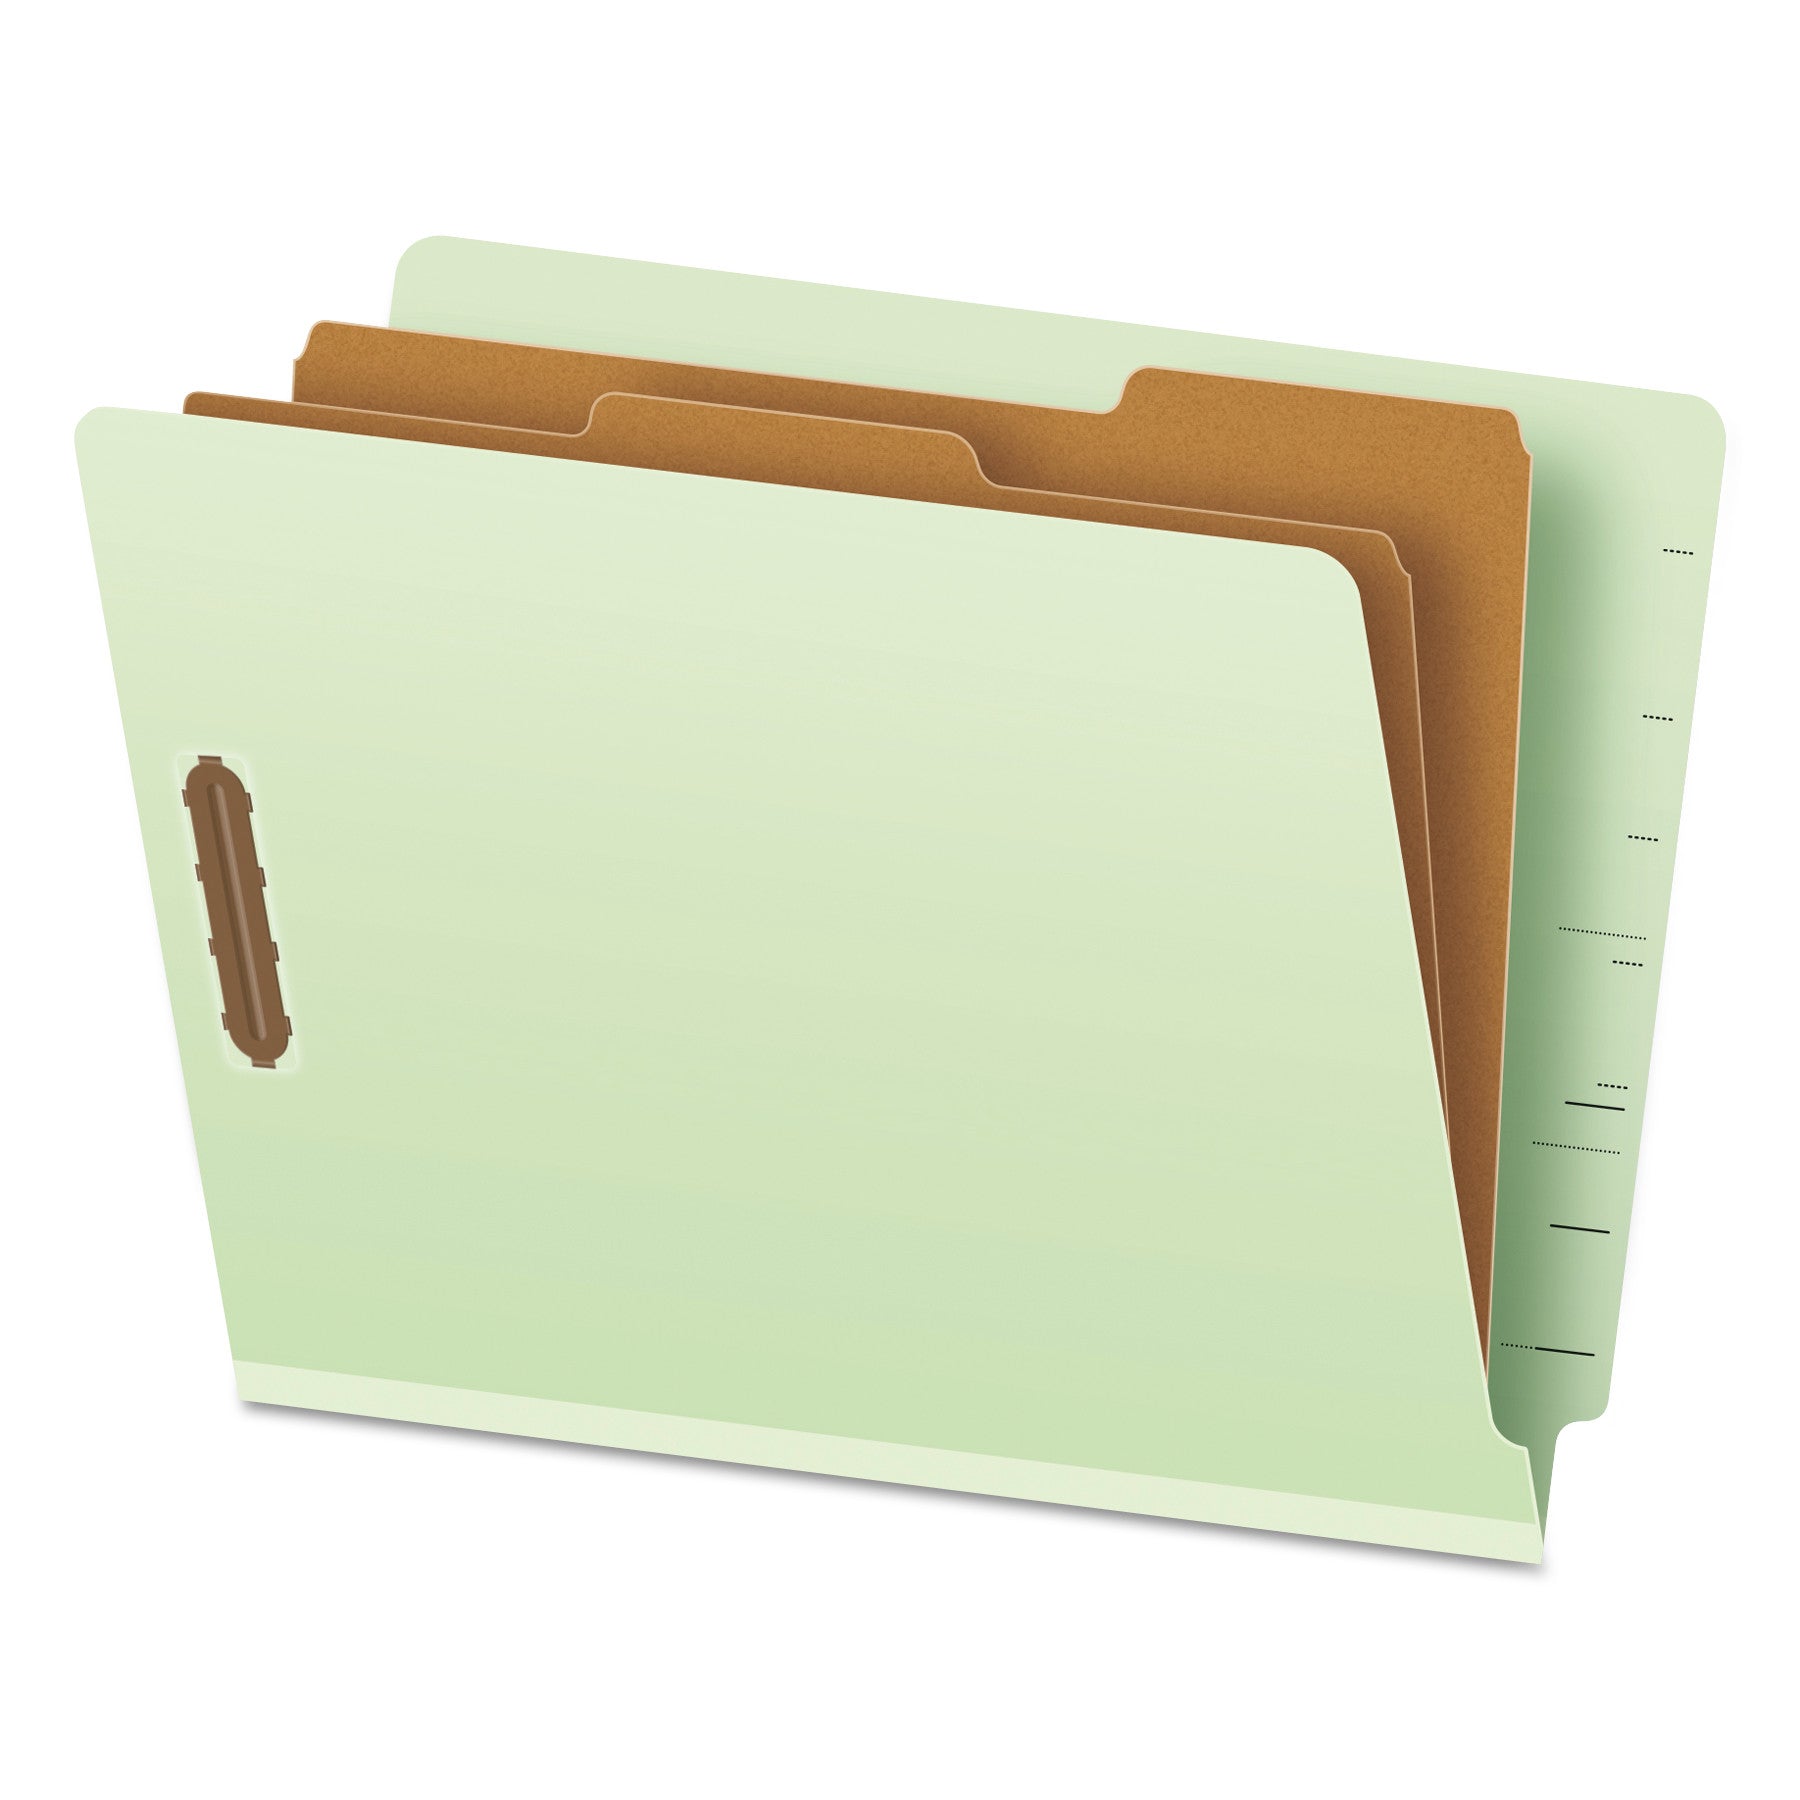 End Tab Classification Folders, 2.5" Expansion, 2 Dividers, 6 Fasteners, Letter Size, Pale Green Exterior, 10/Box - 